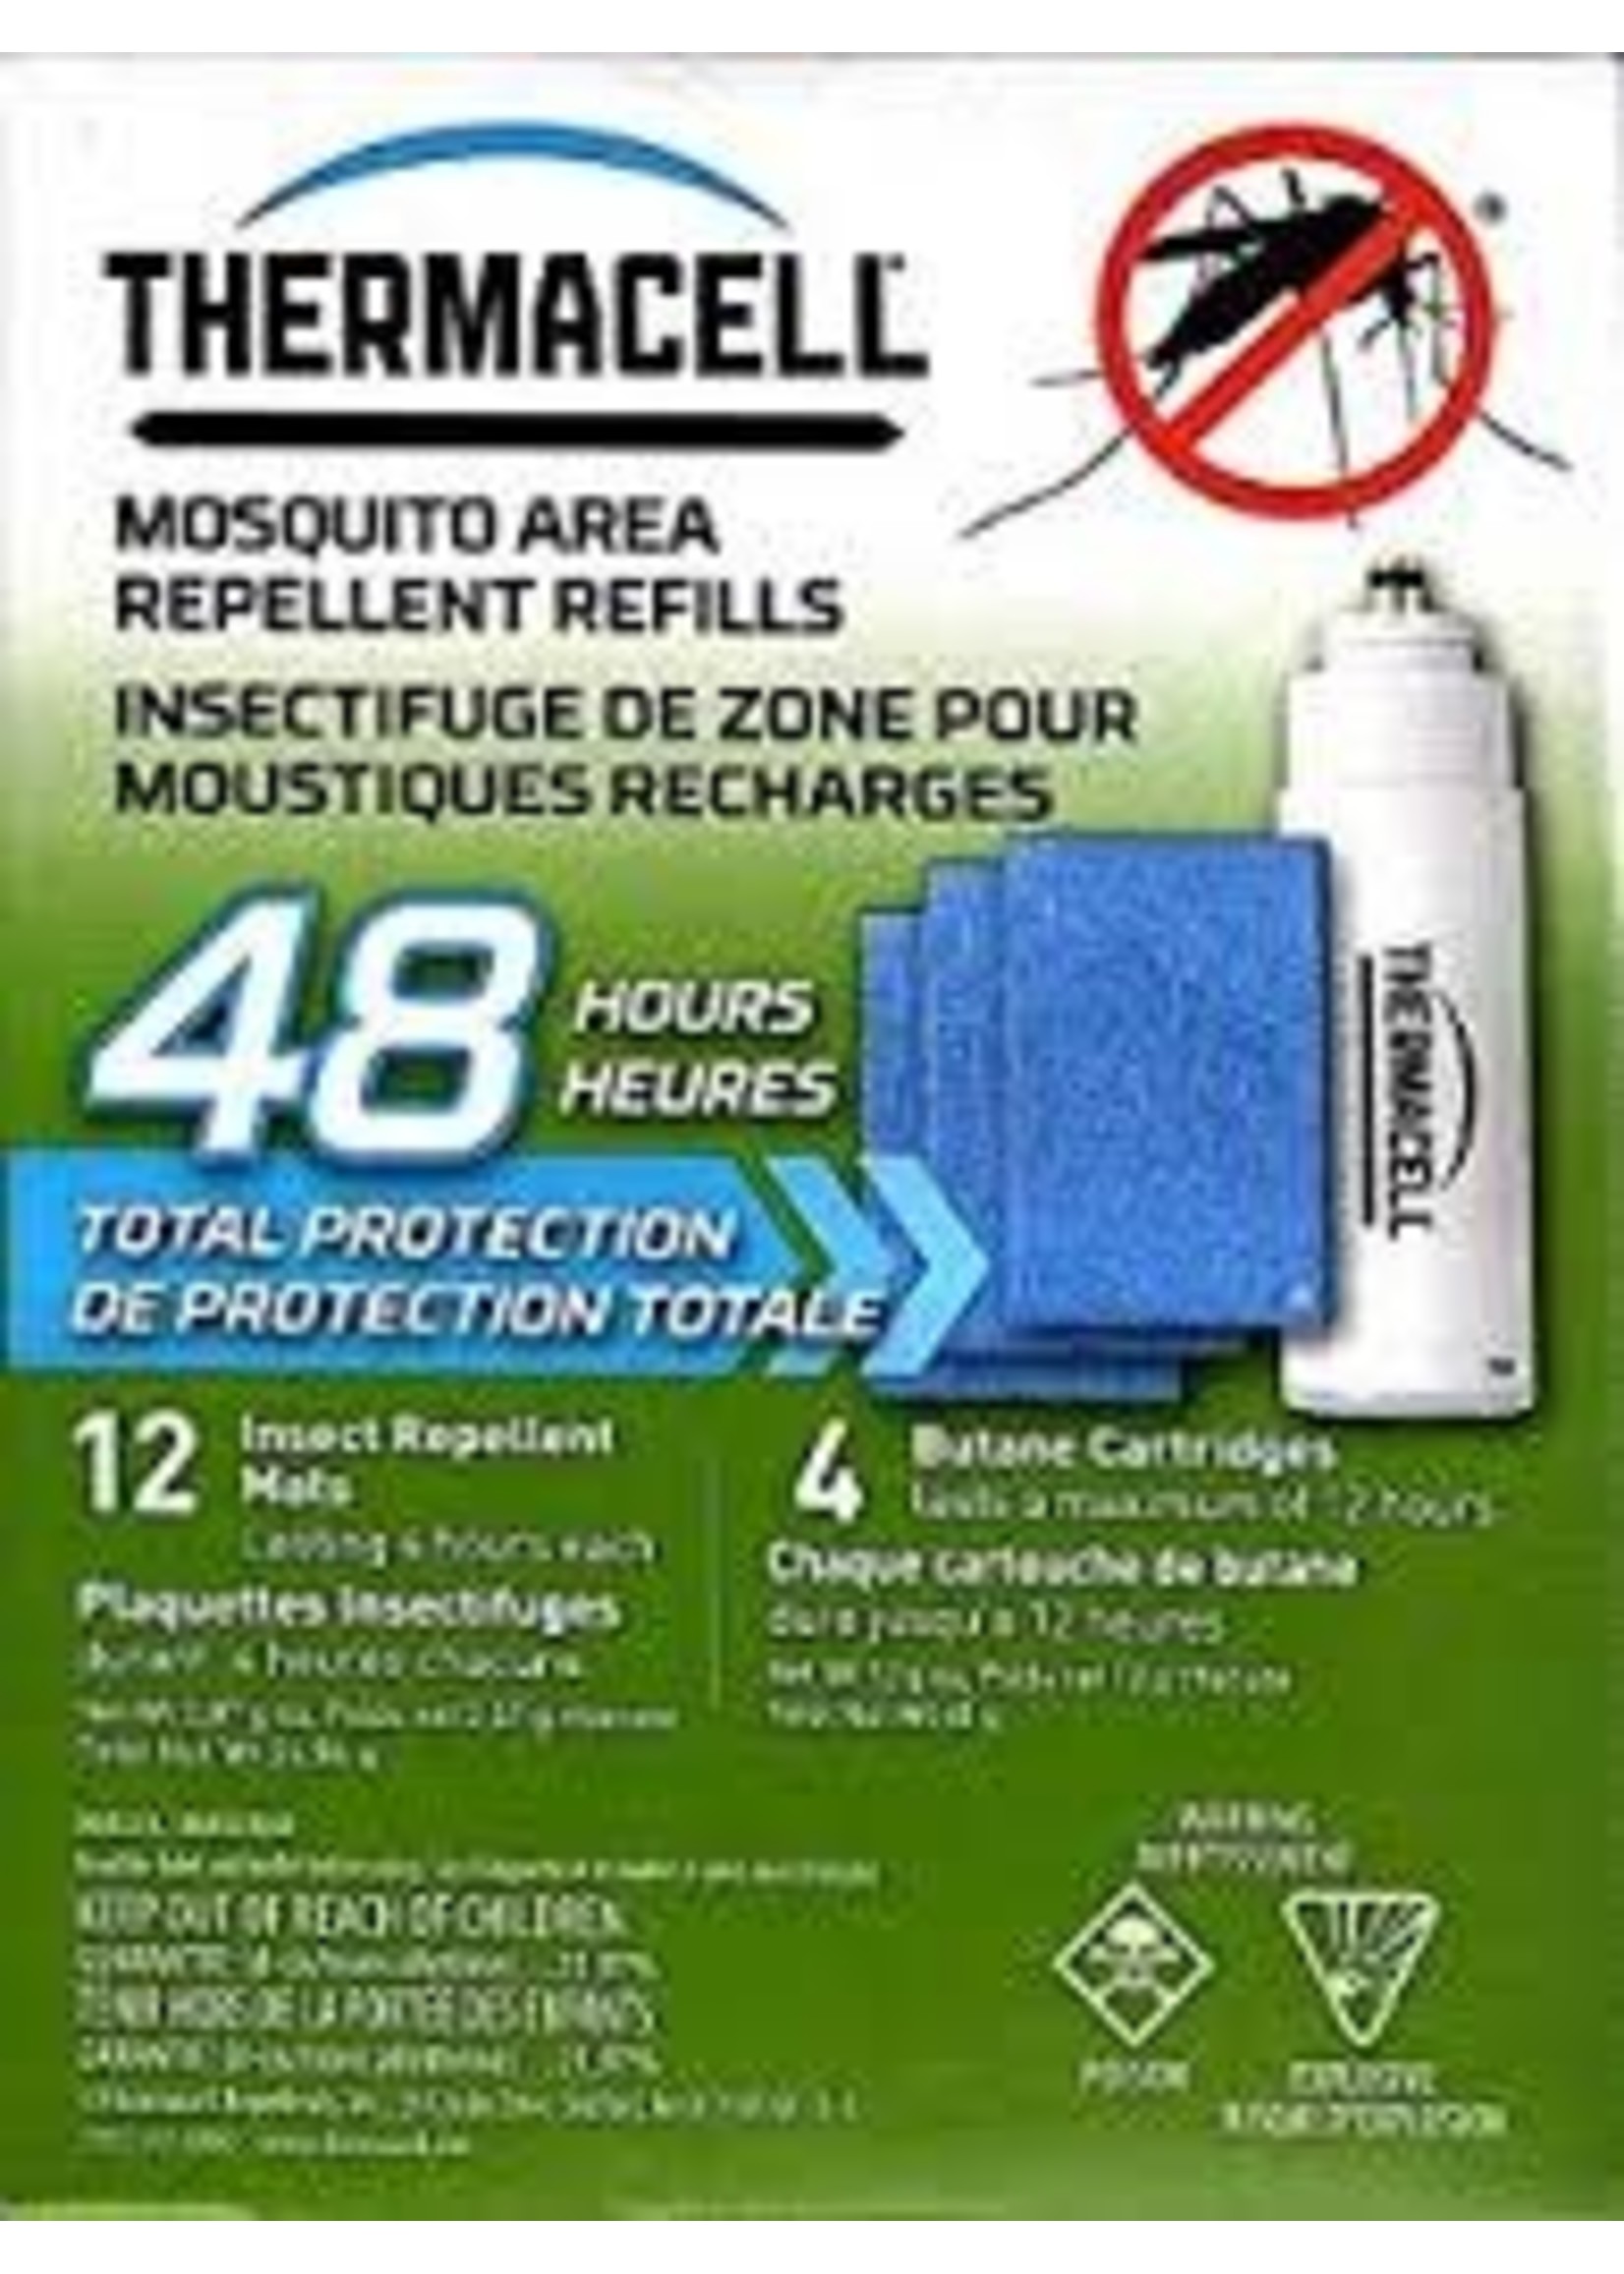 THERMACELL THERMACELL MOSQUITO AREA REPELLENT REFILLS 48 HRS 12MATS